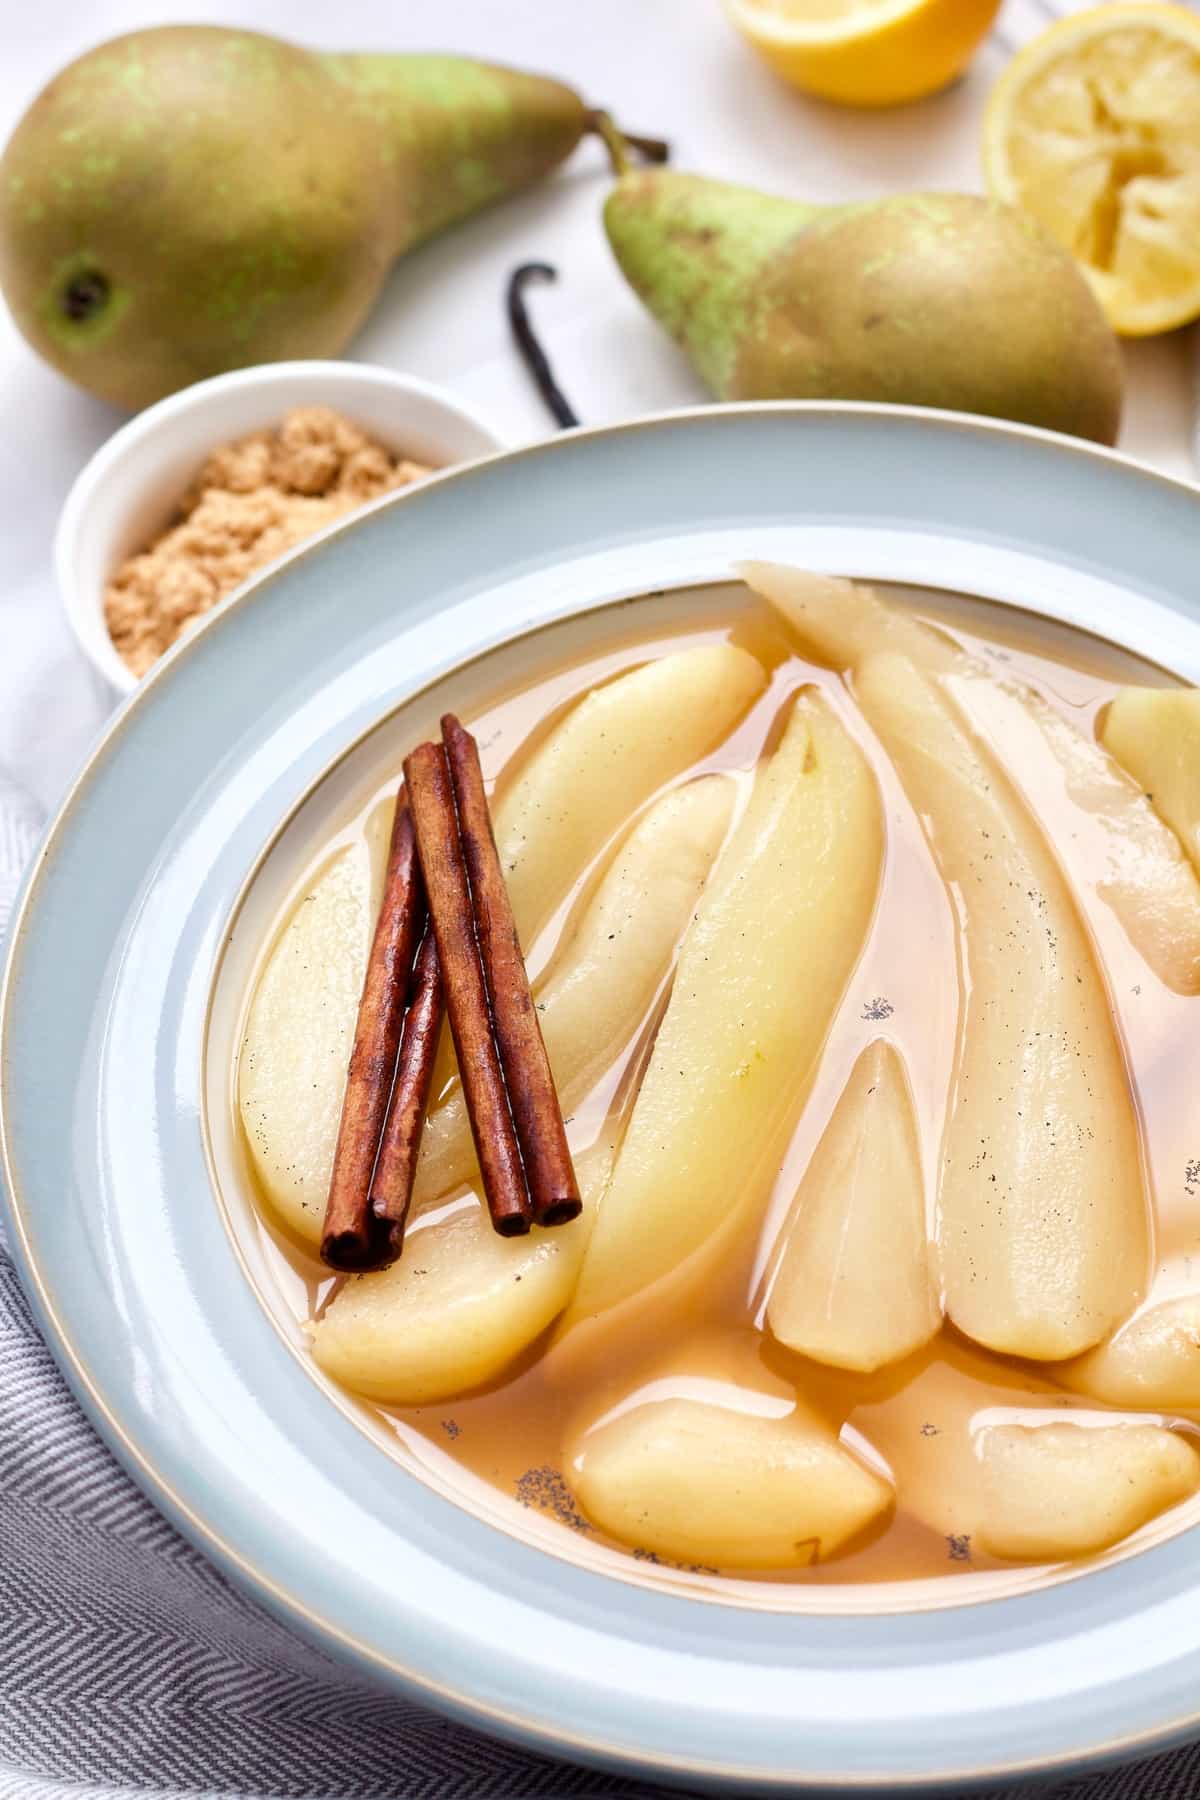 Bowl with stewed pears, cinnamon sticks, pears in the background.